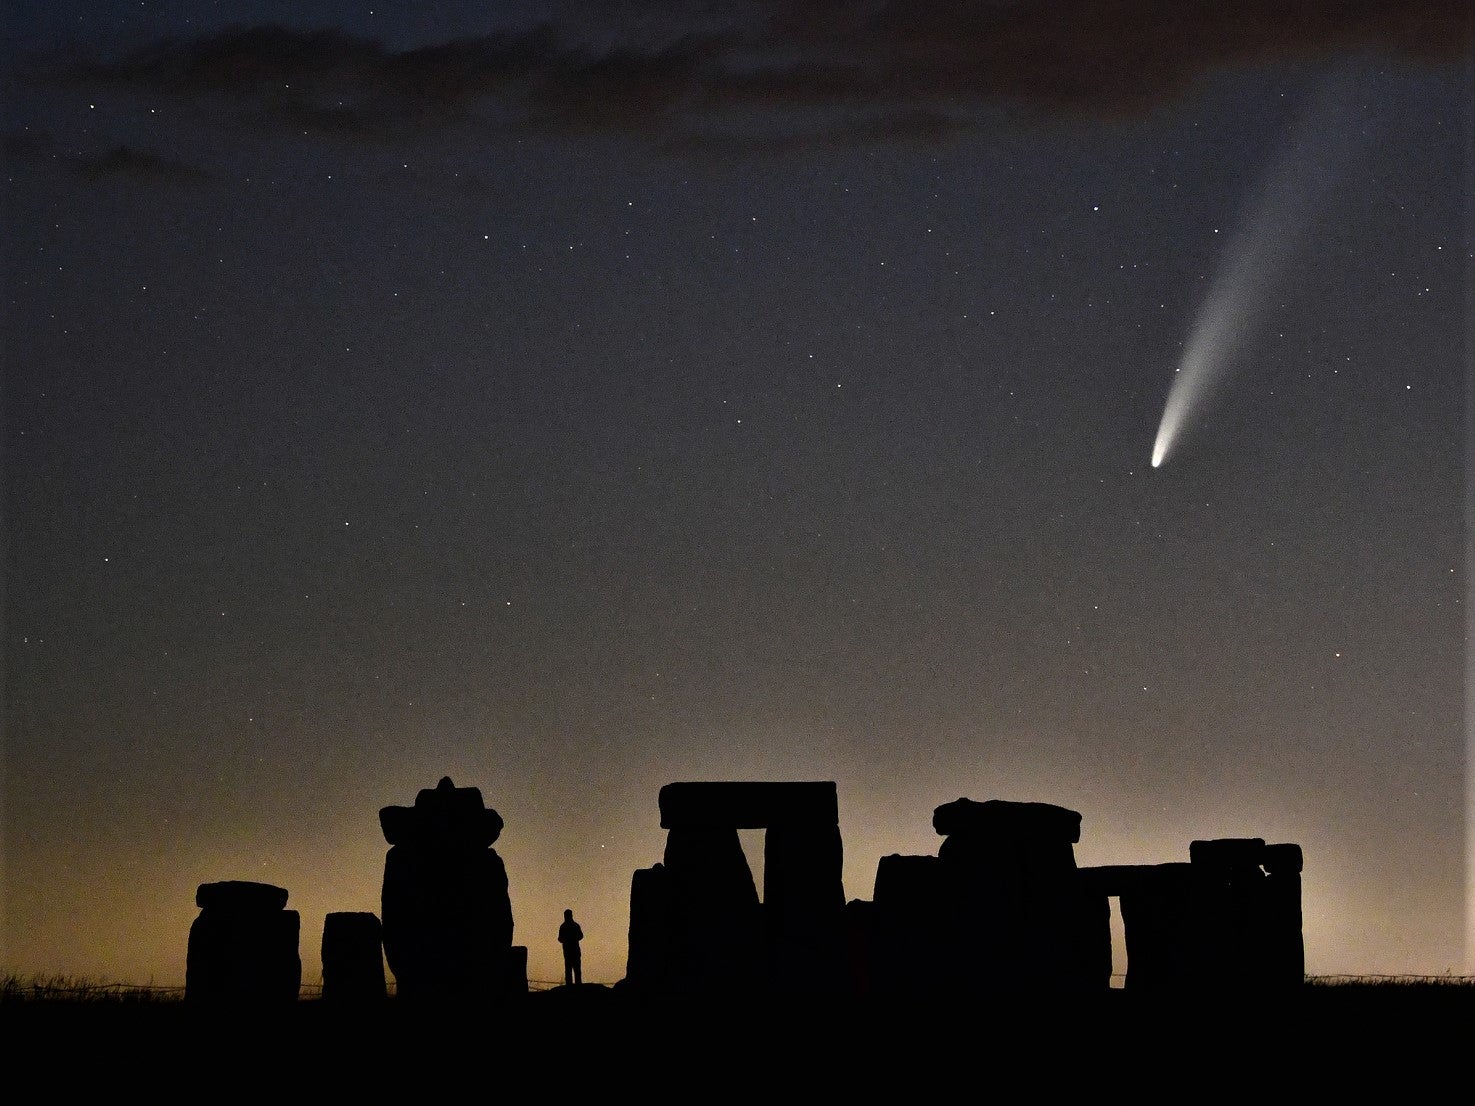 The 2020 winter solstice will see two rare astronomical events coincide